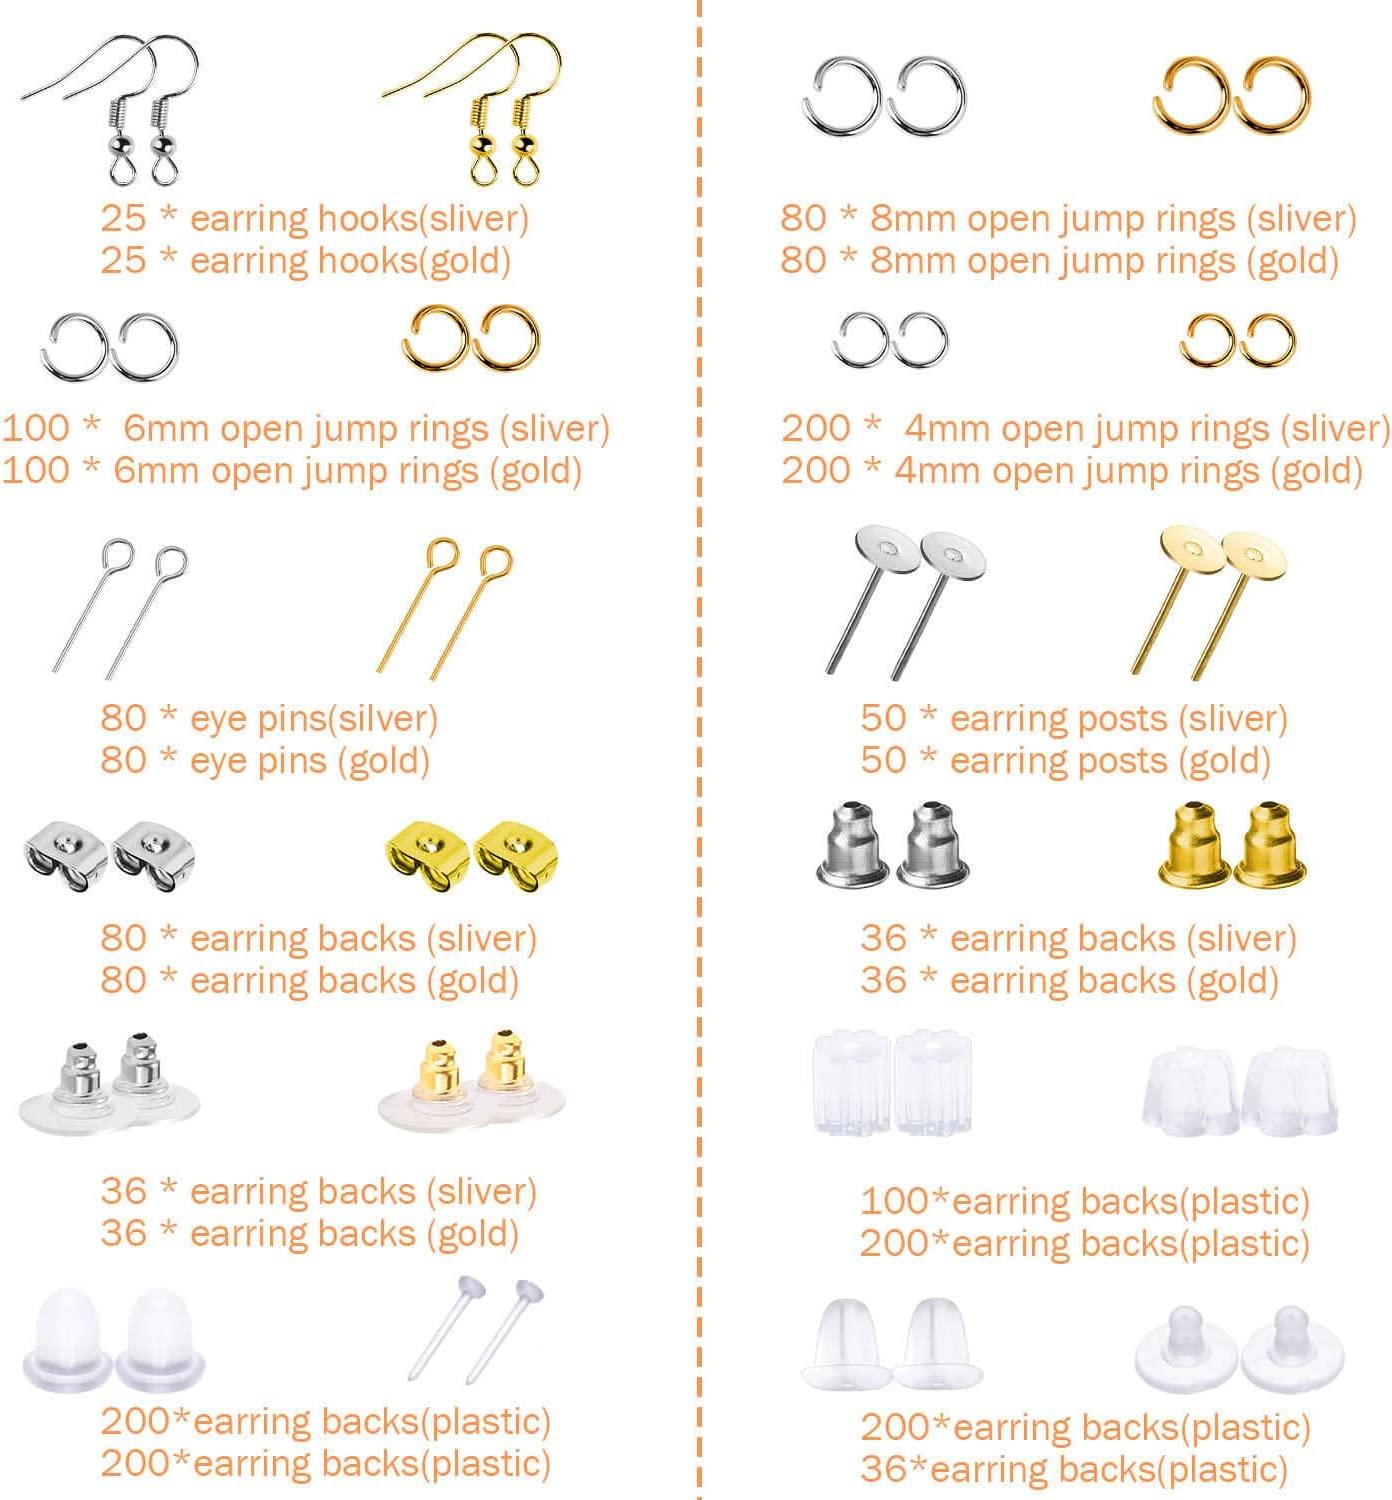 Beads Venue on LinkedIn: Buy wide selection of sterling silver earring  findings and get up to 10%…